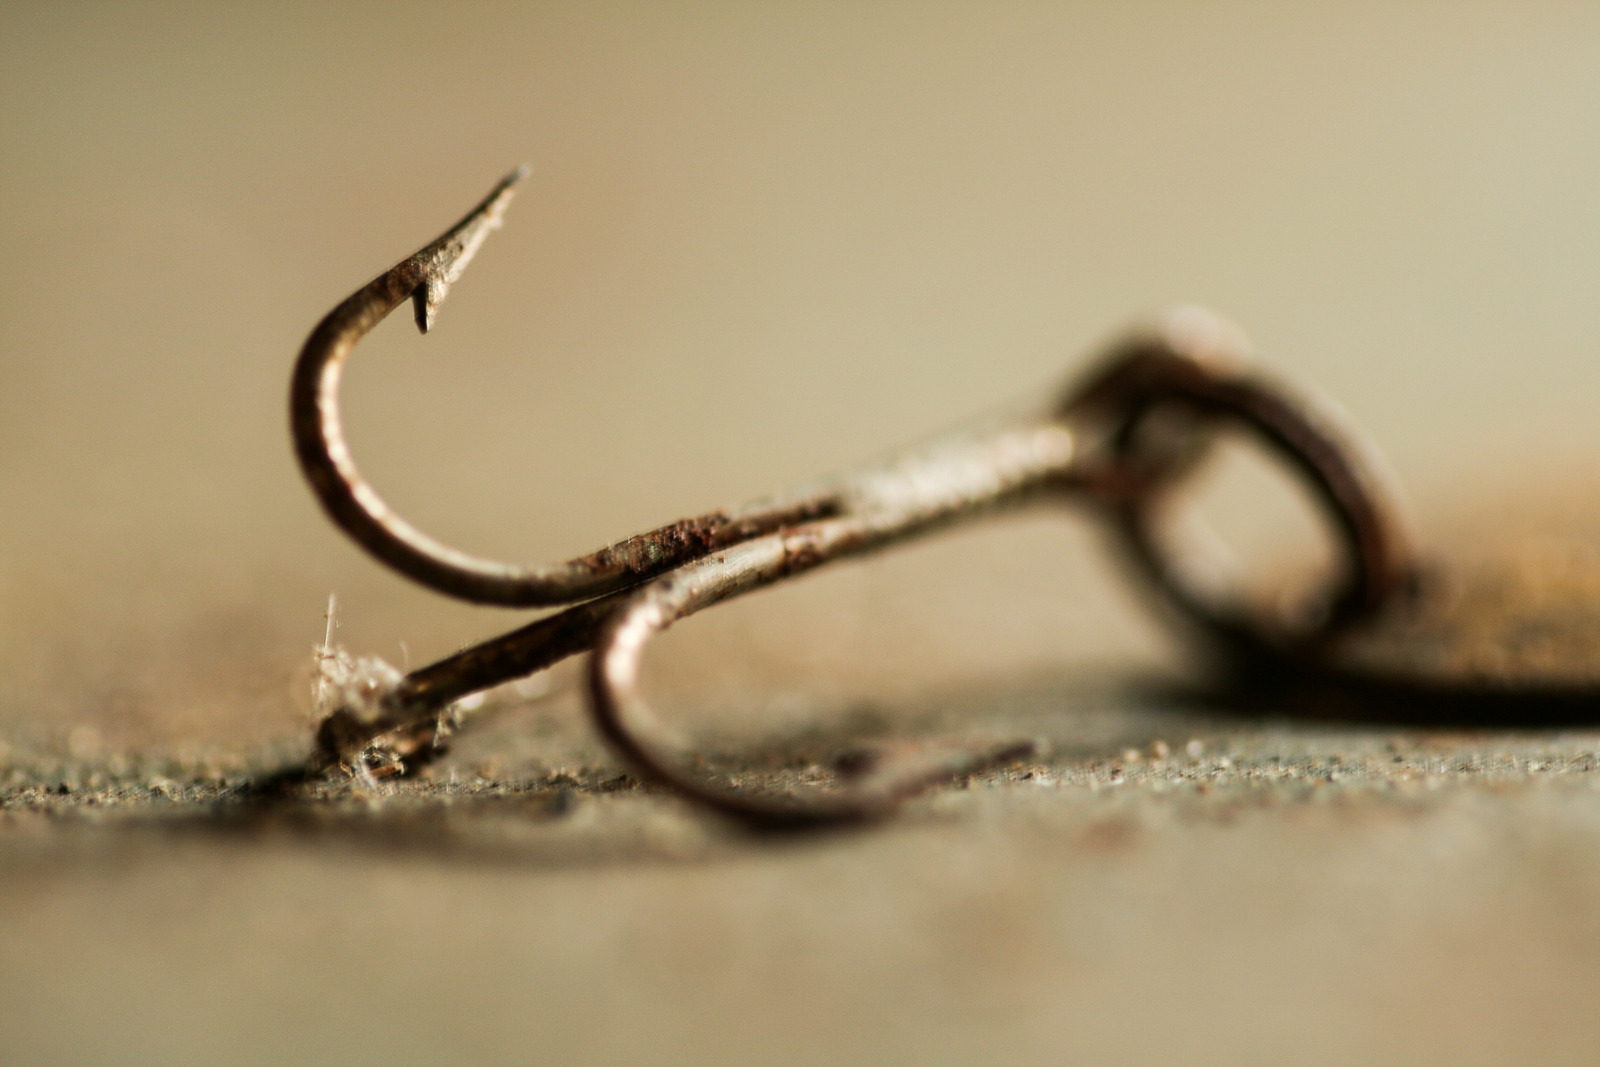 Are Rusty Fishing Hooks Bad For Fishing? Are They Safe? - Fishermen's Angle